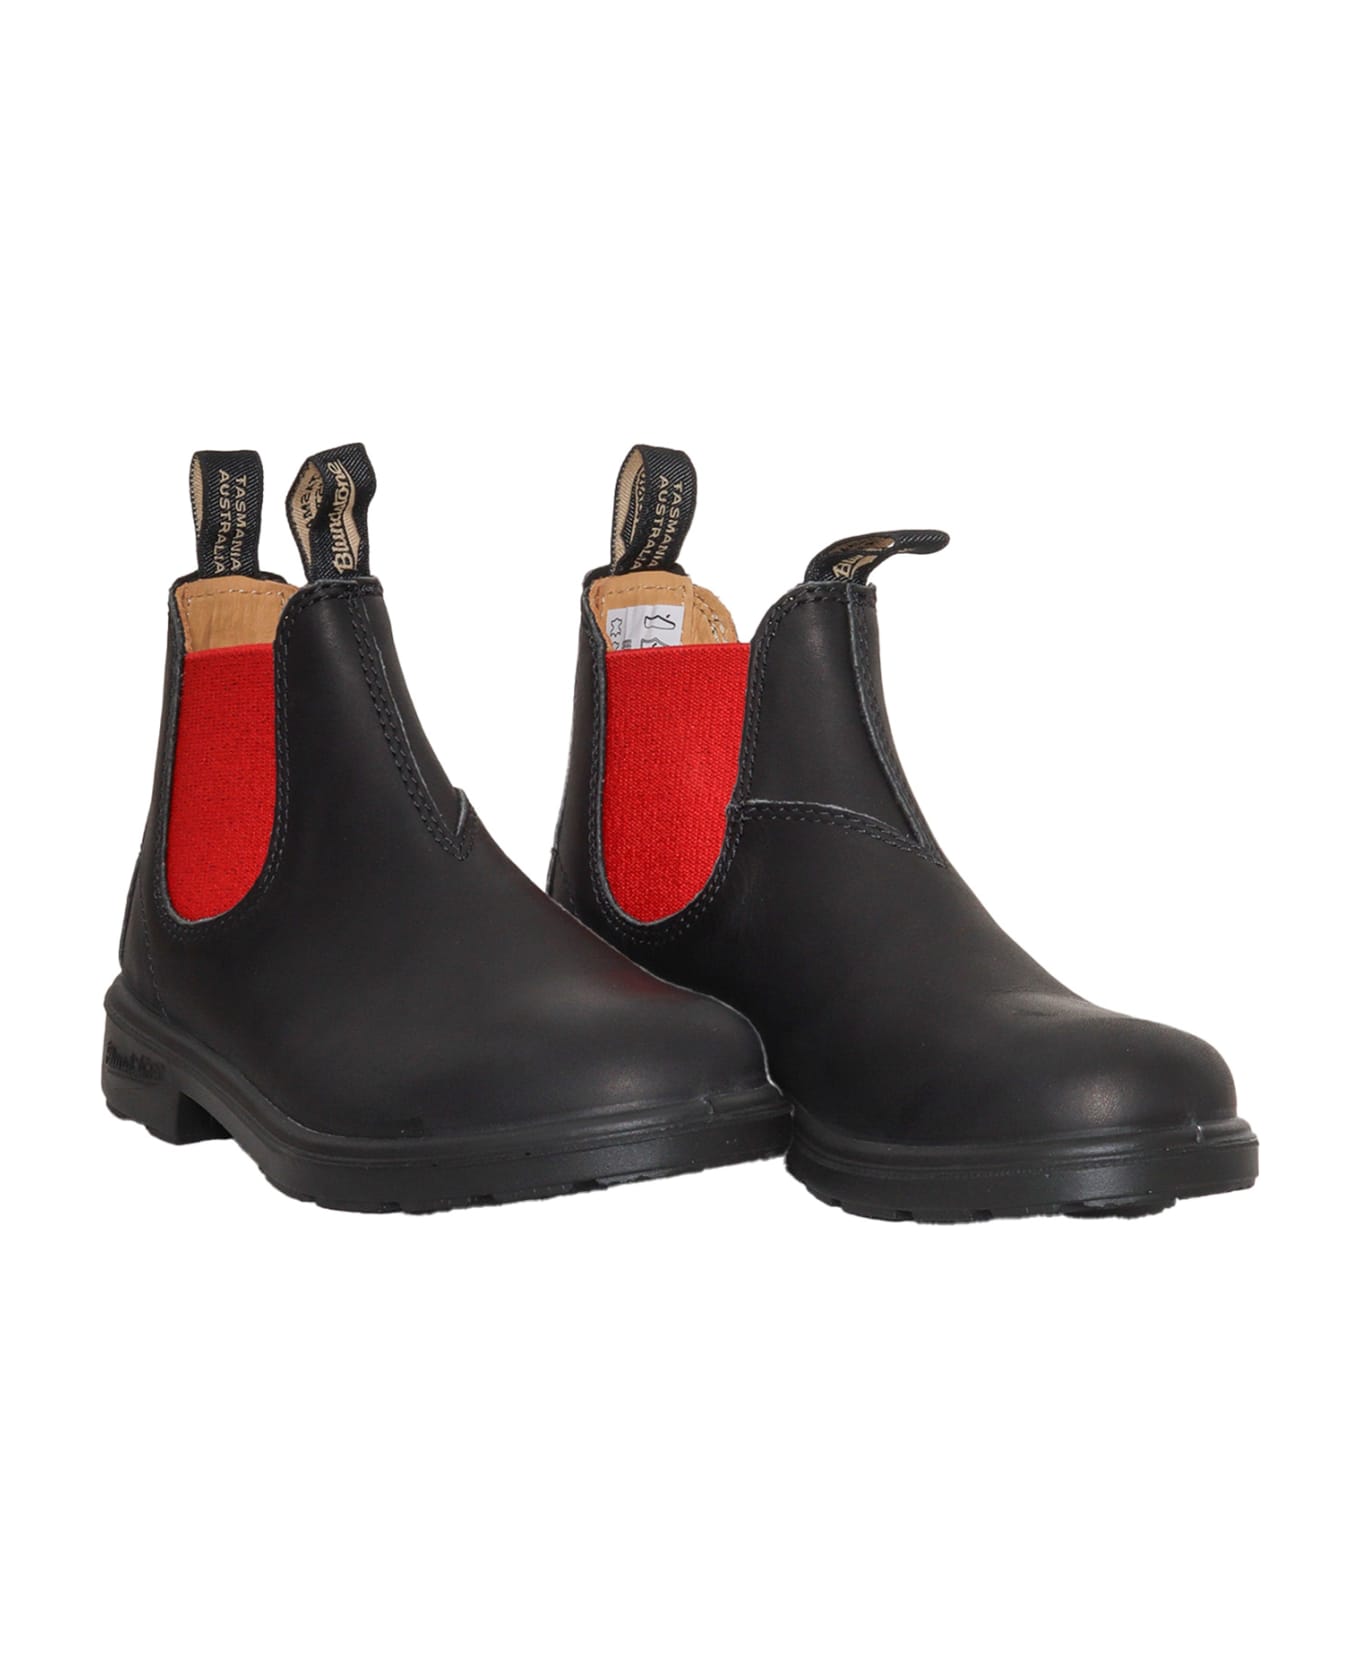 Blundstone 581 Ankle Boots - BLACK シューズ